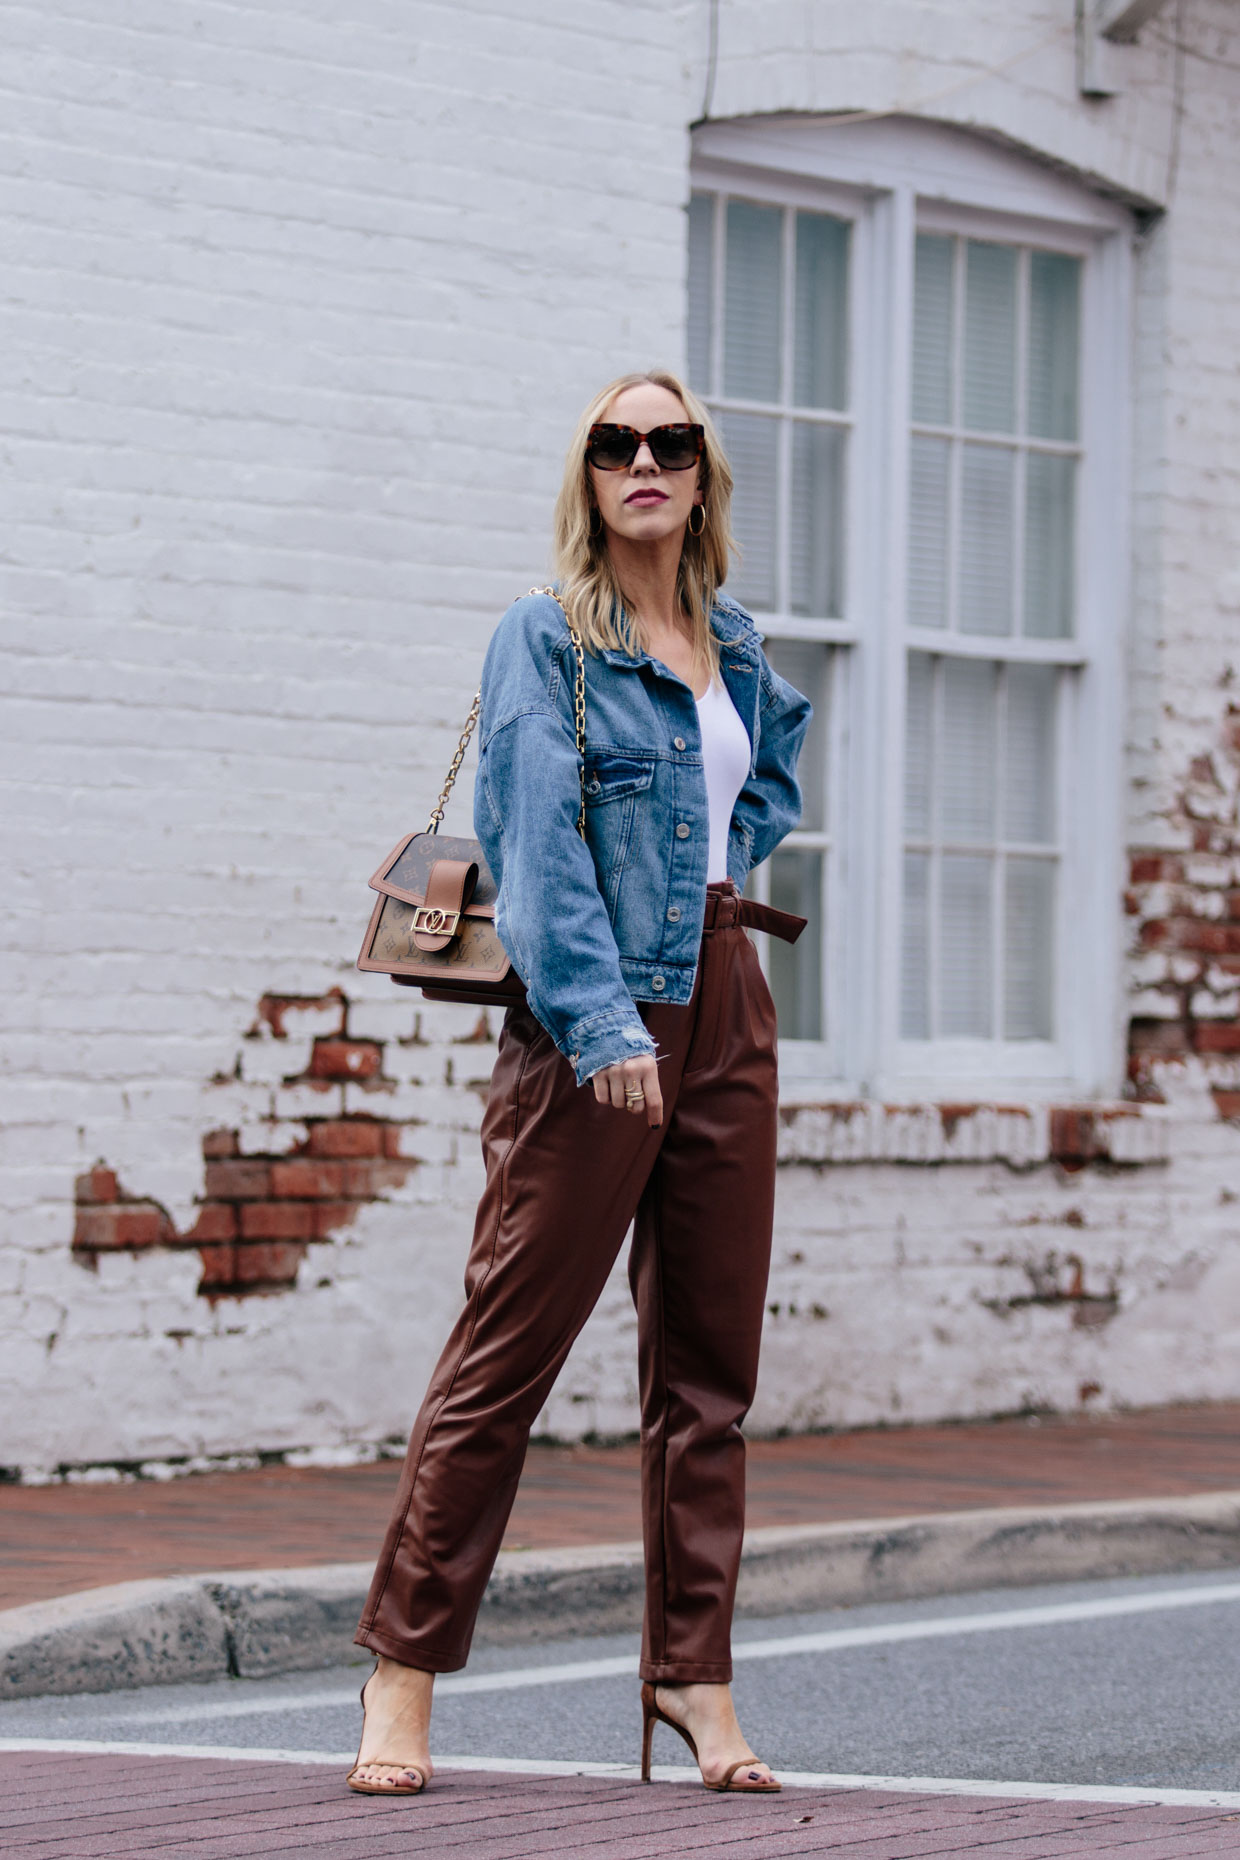 Meagan Brandon fashion blogger shows chic leather outfit idea with